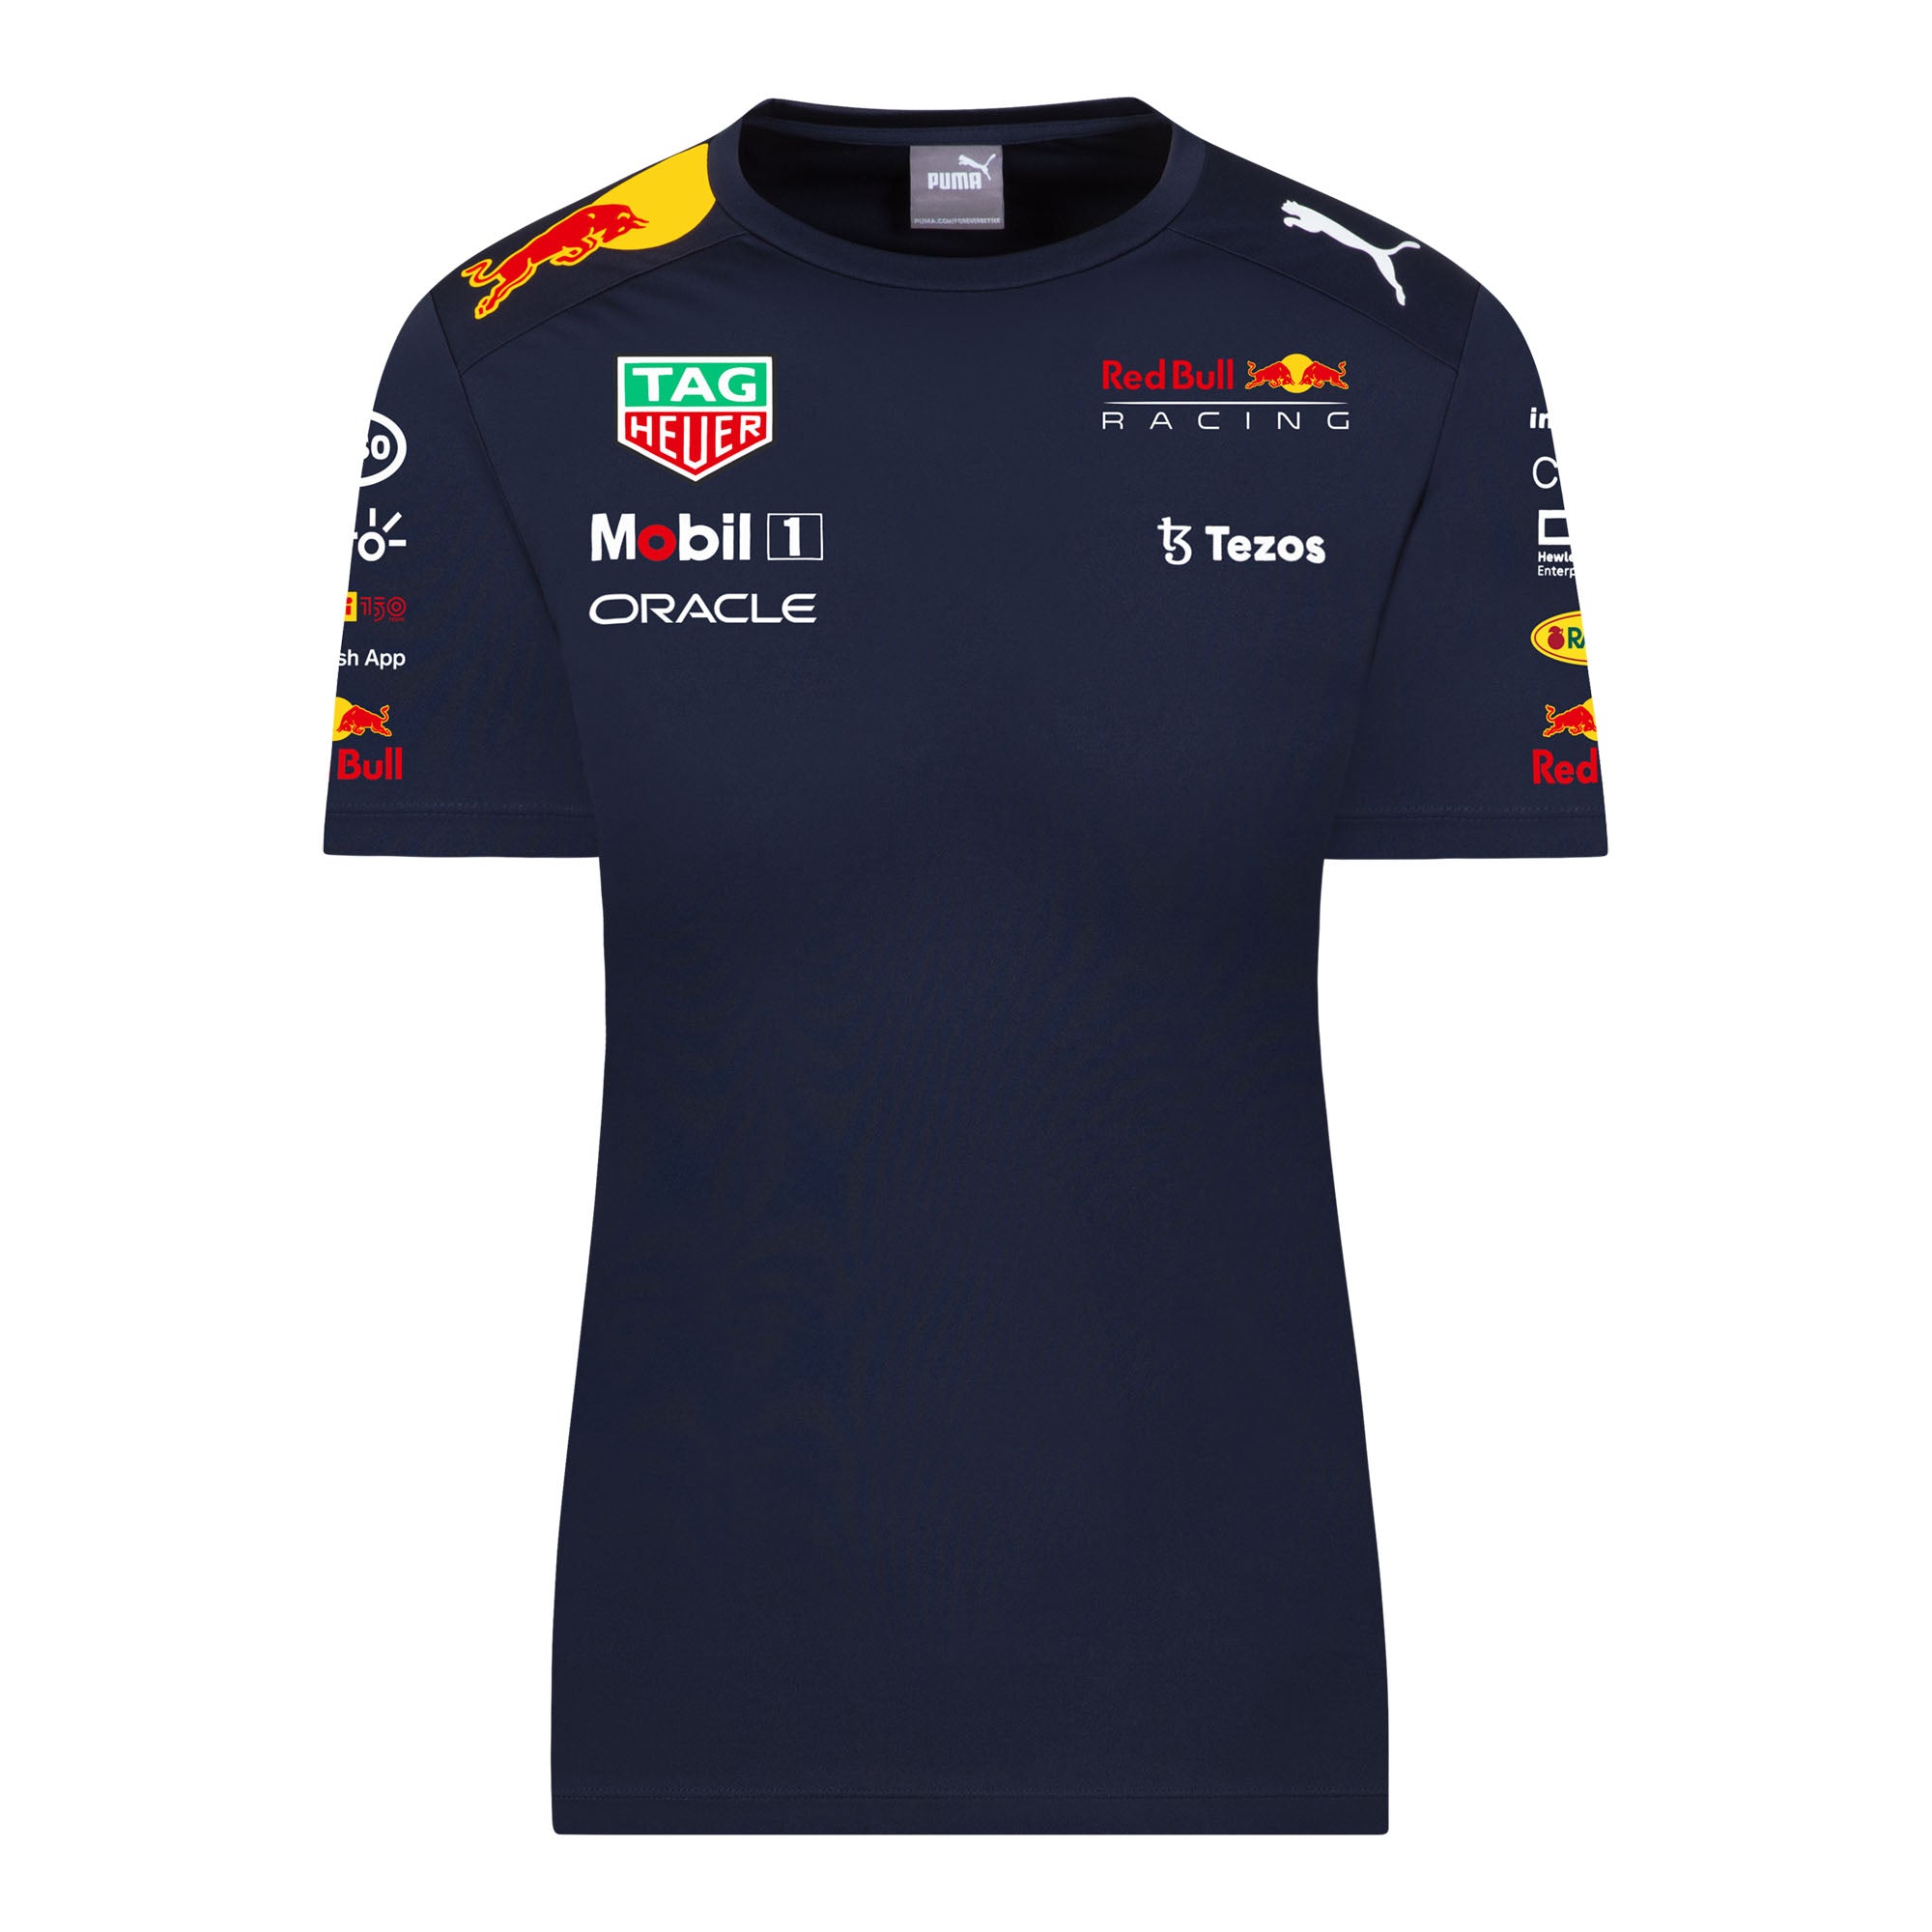 New Puma Red Bull Racing Official Teamline T-Shirt Youth Kids M 140 9-10 Y